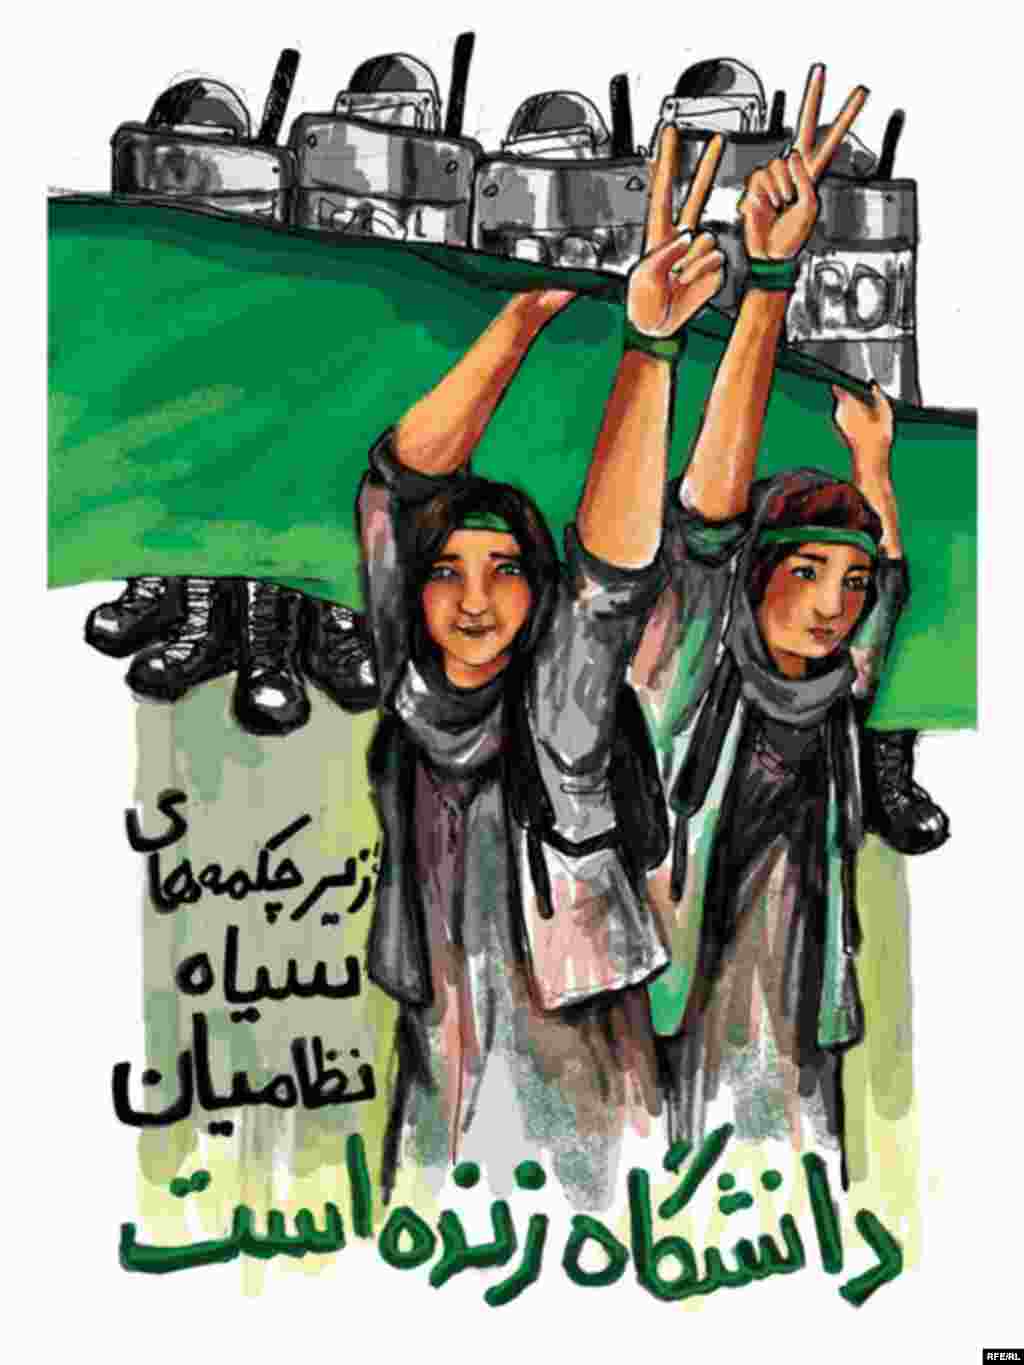 Iran's Election Unrest: An Artist's View #1